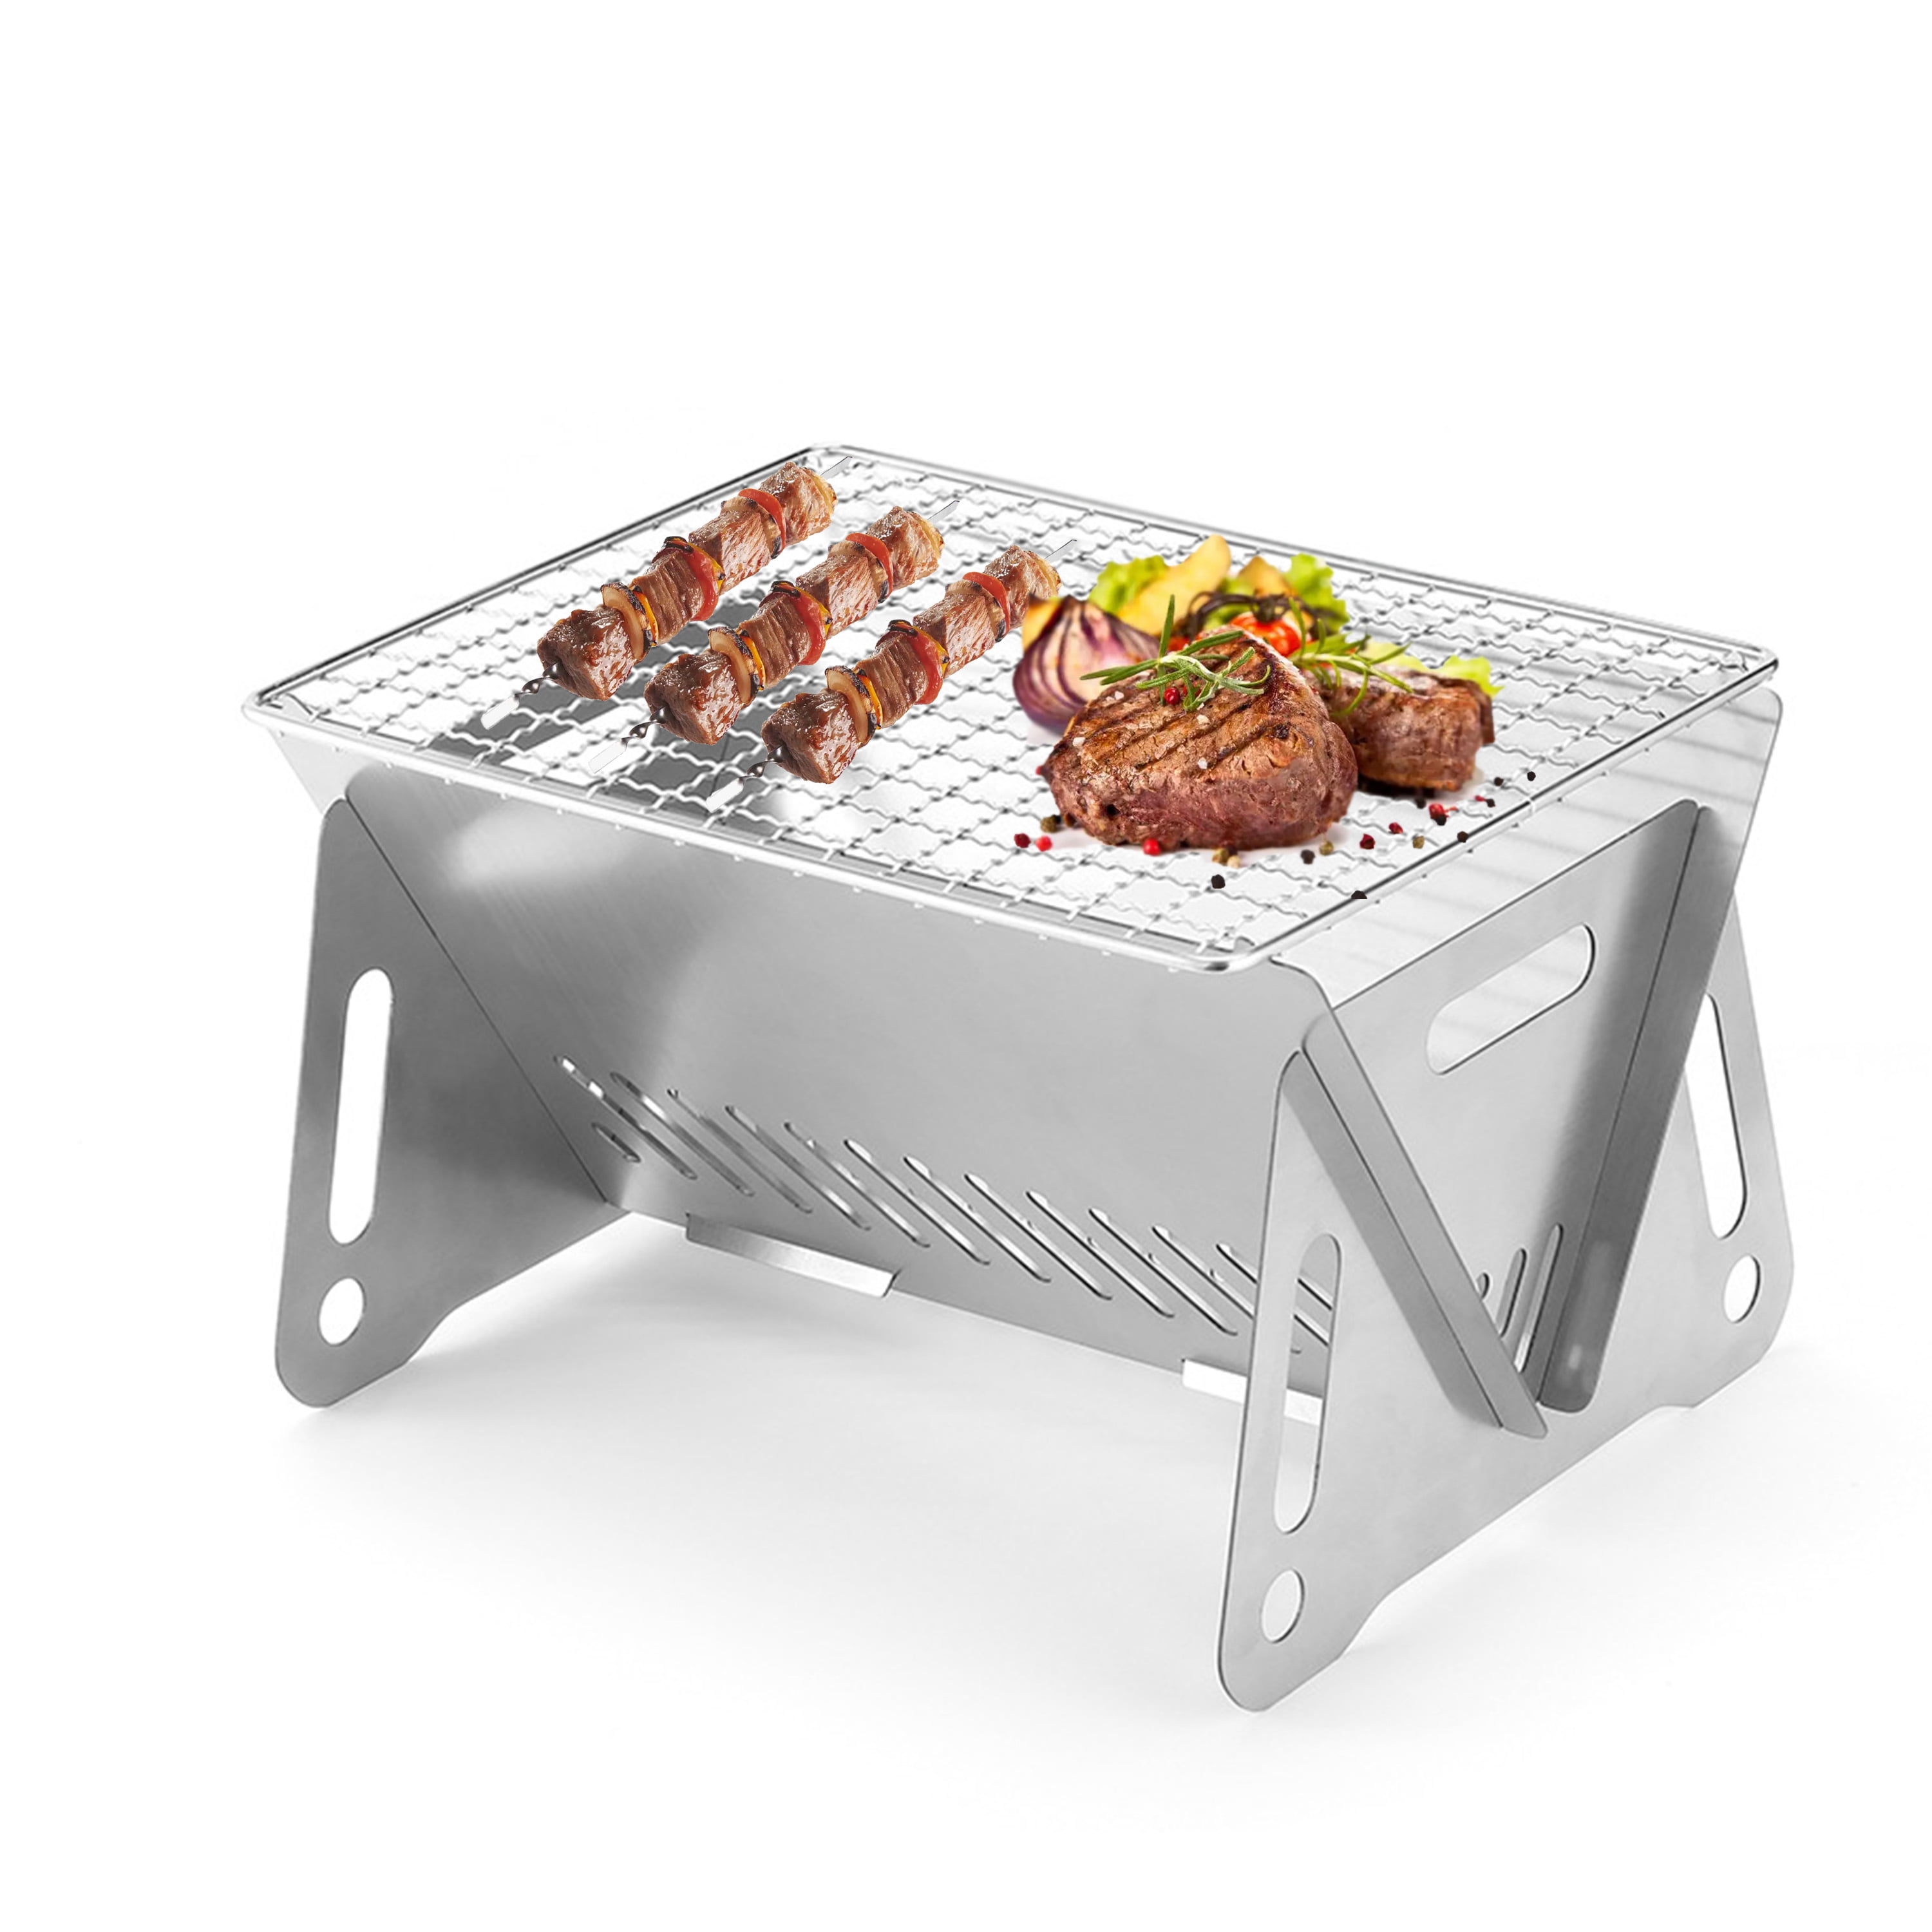 Camping Grill Campfire BBQ outdoor Stainless Steel Portable Cooking Tool New 